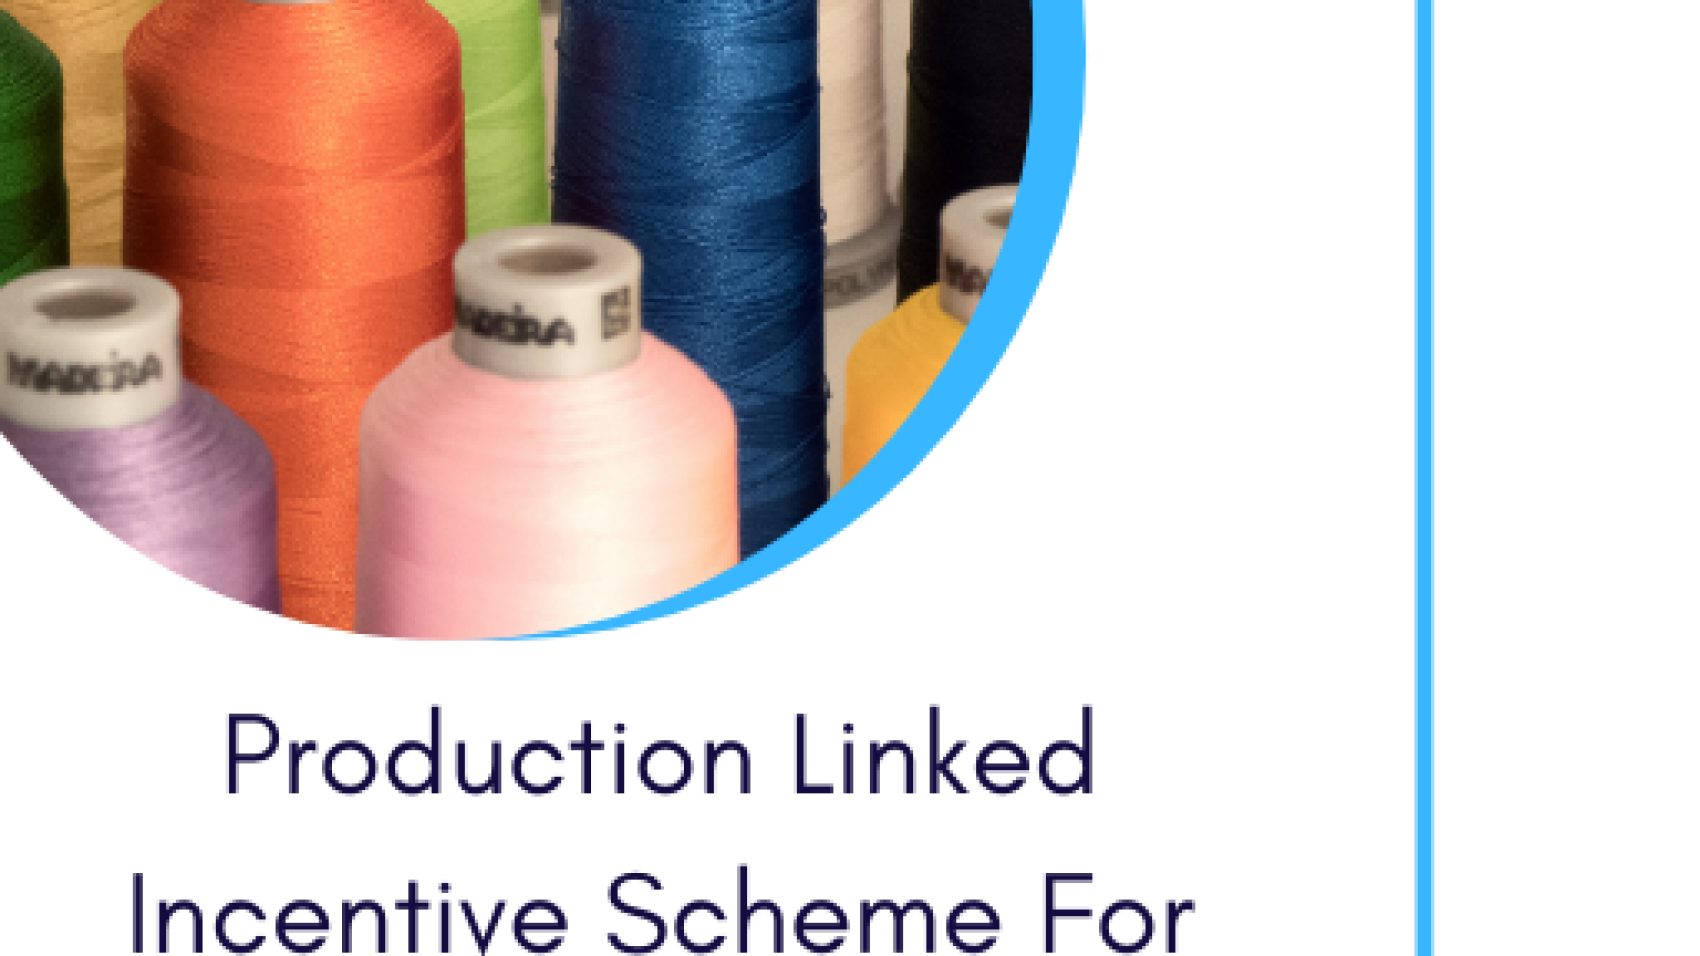 Production linked incentive scheme for textile industry